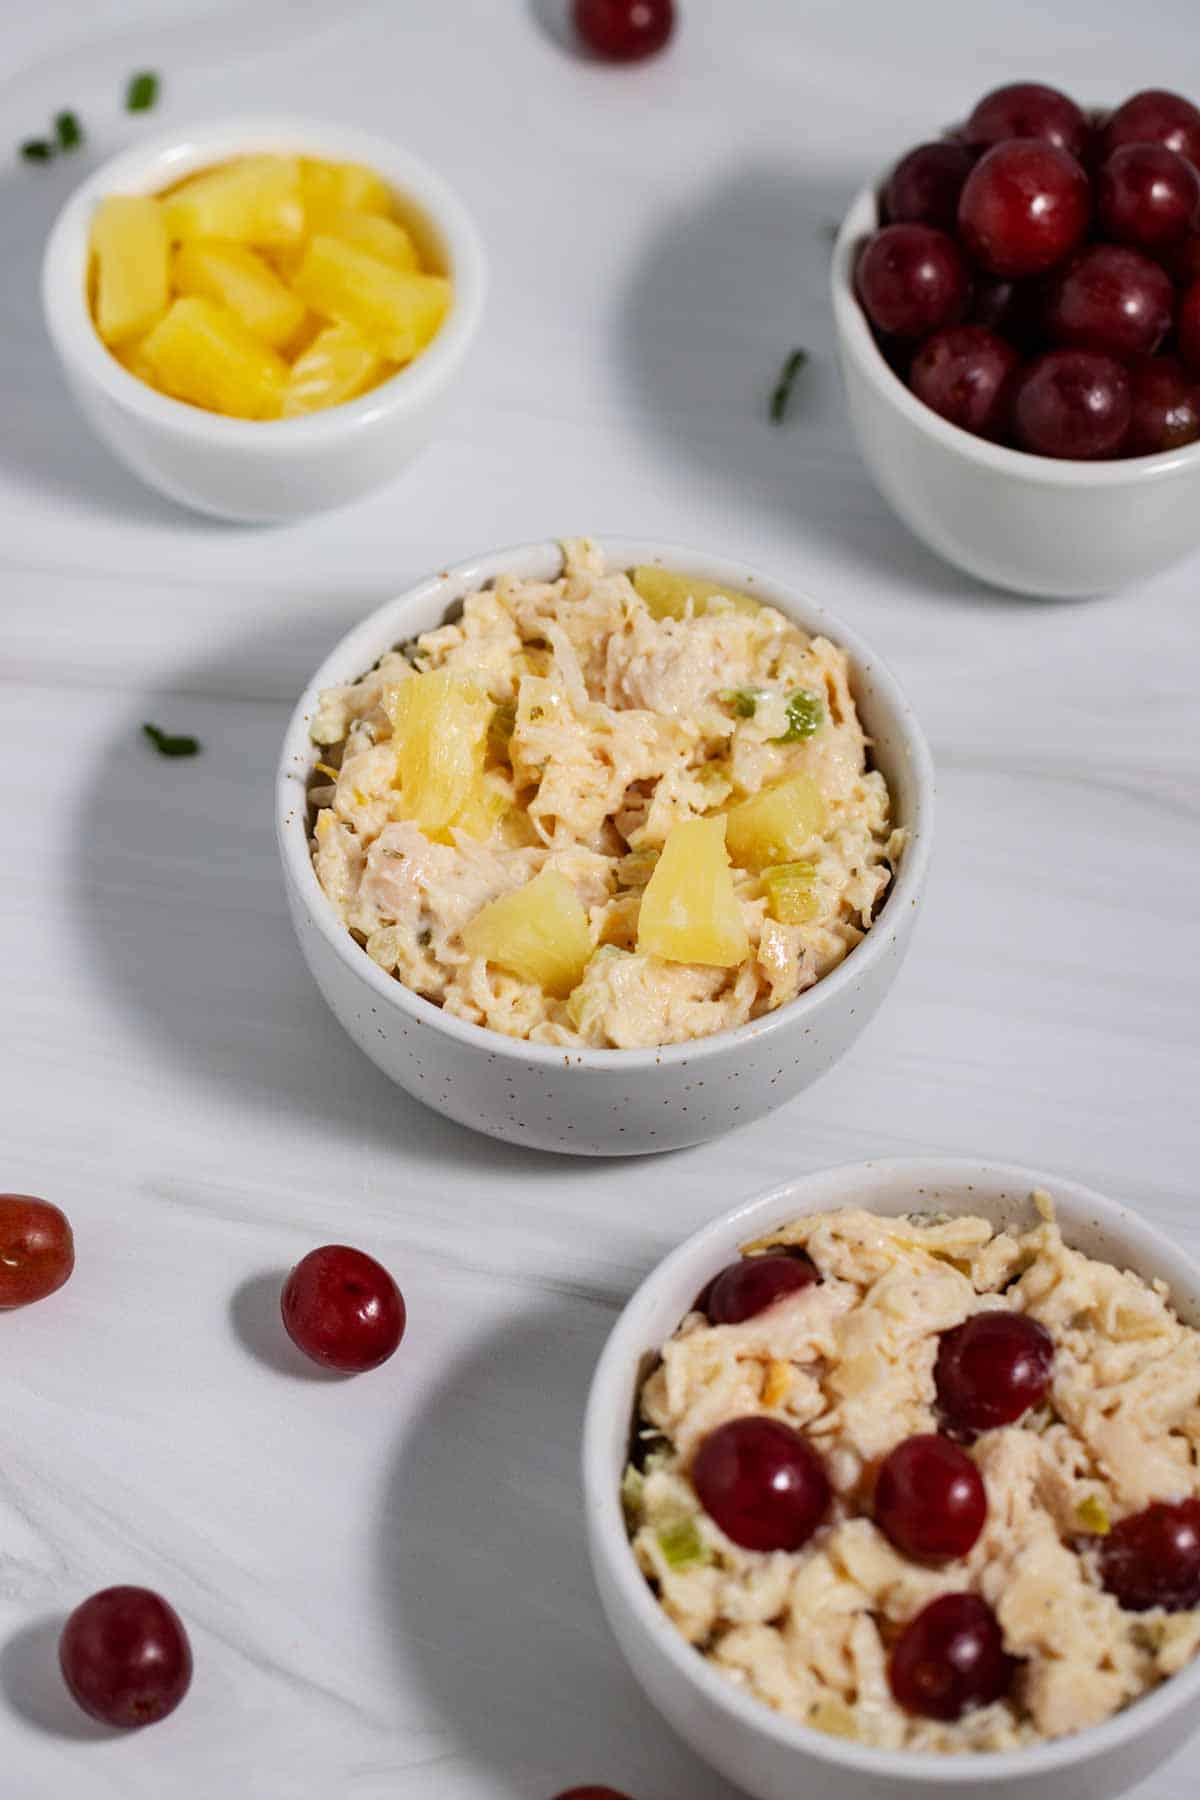 Bowls of store-bought chicken salad with pineapple and grapes to make it taste better.